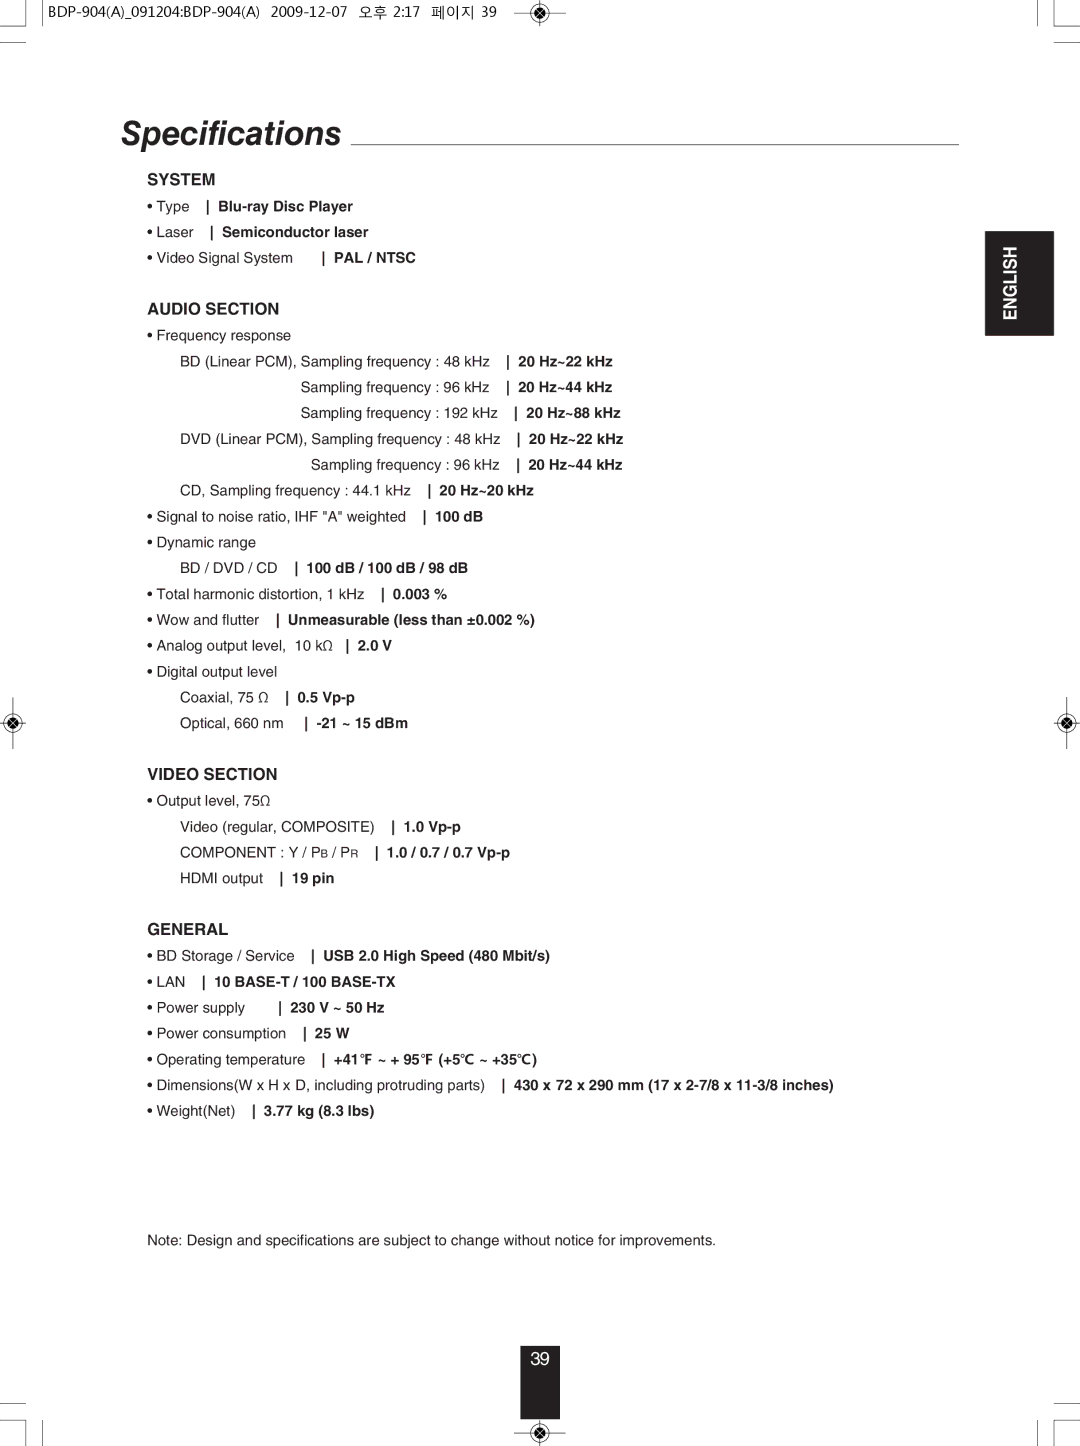 Sherwood BDP-904 manual Specifications 